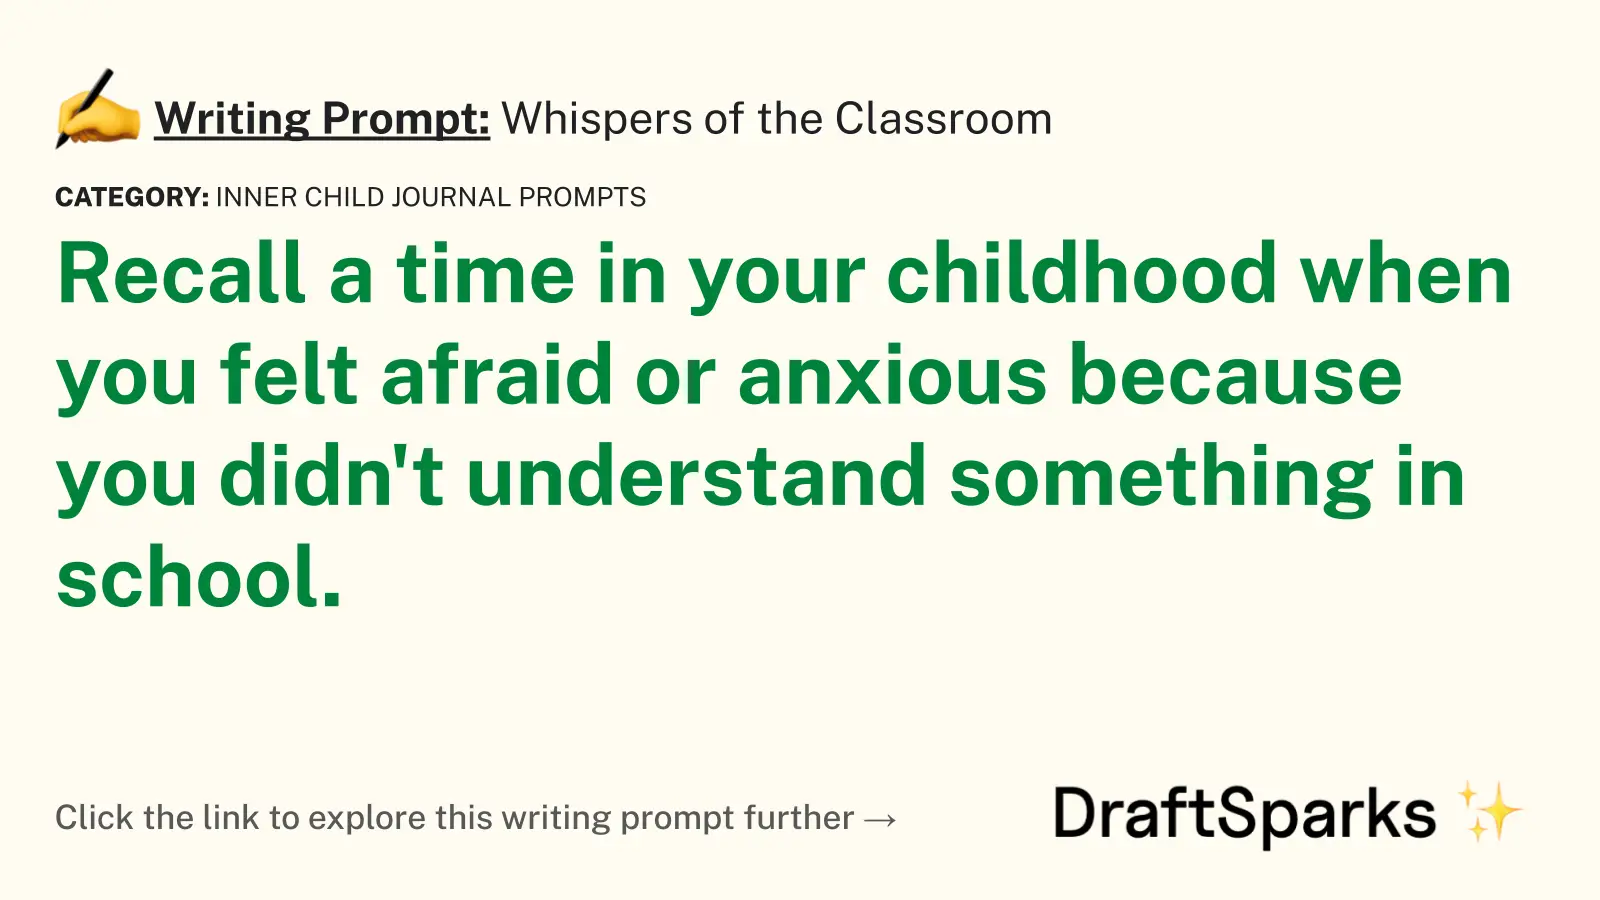 Whispers of the Classroom